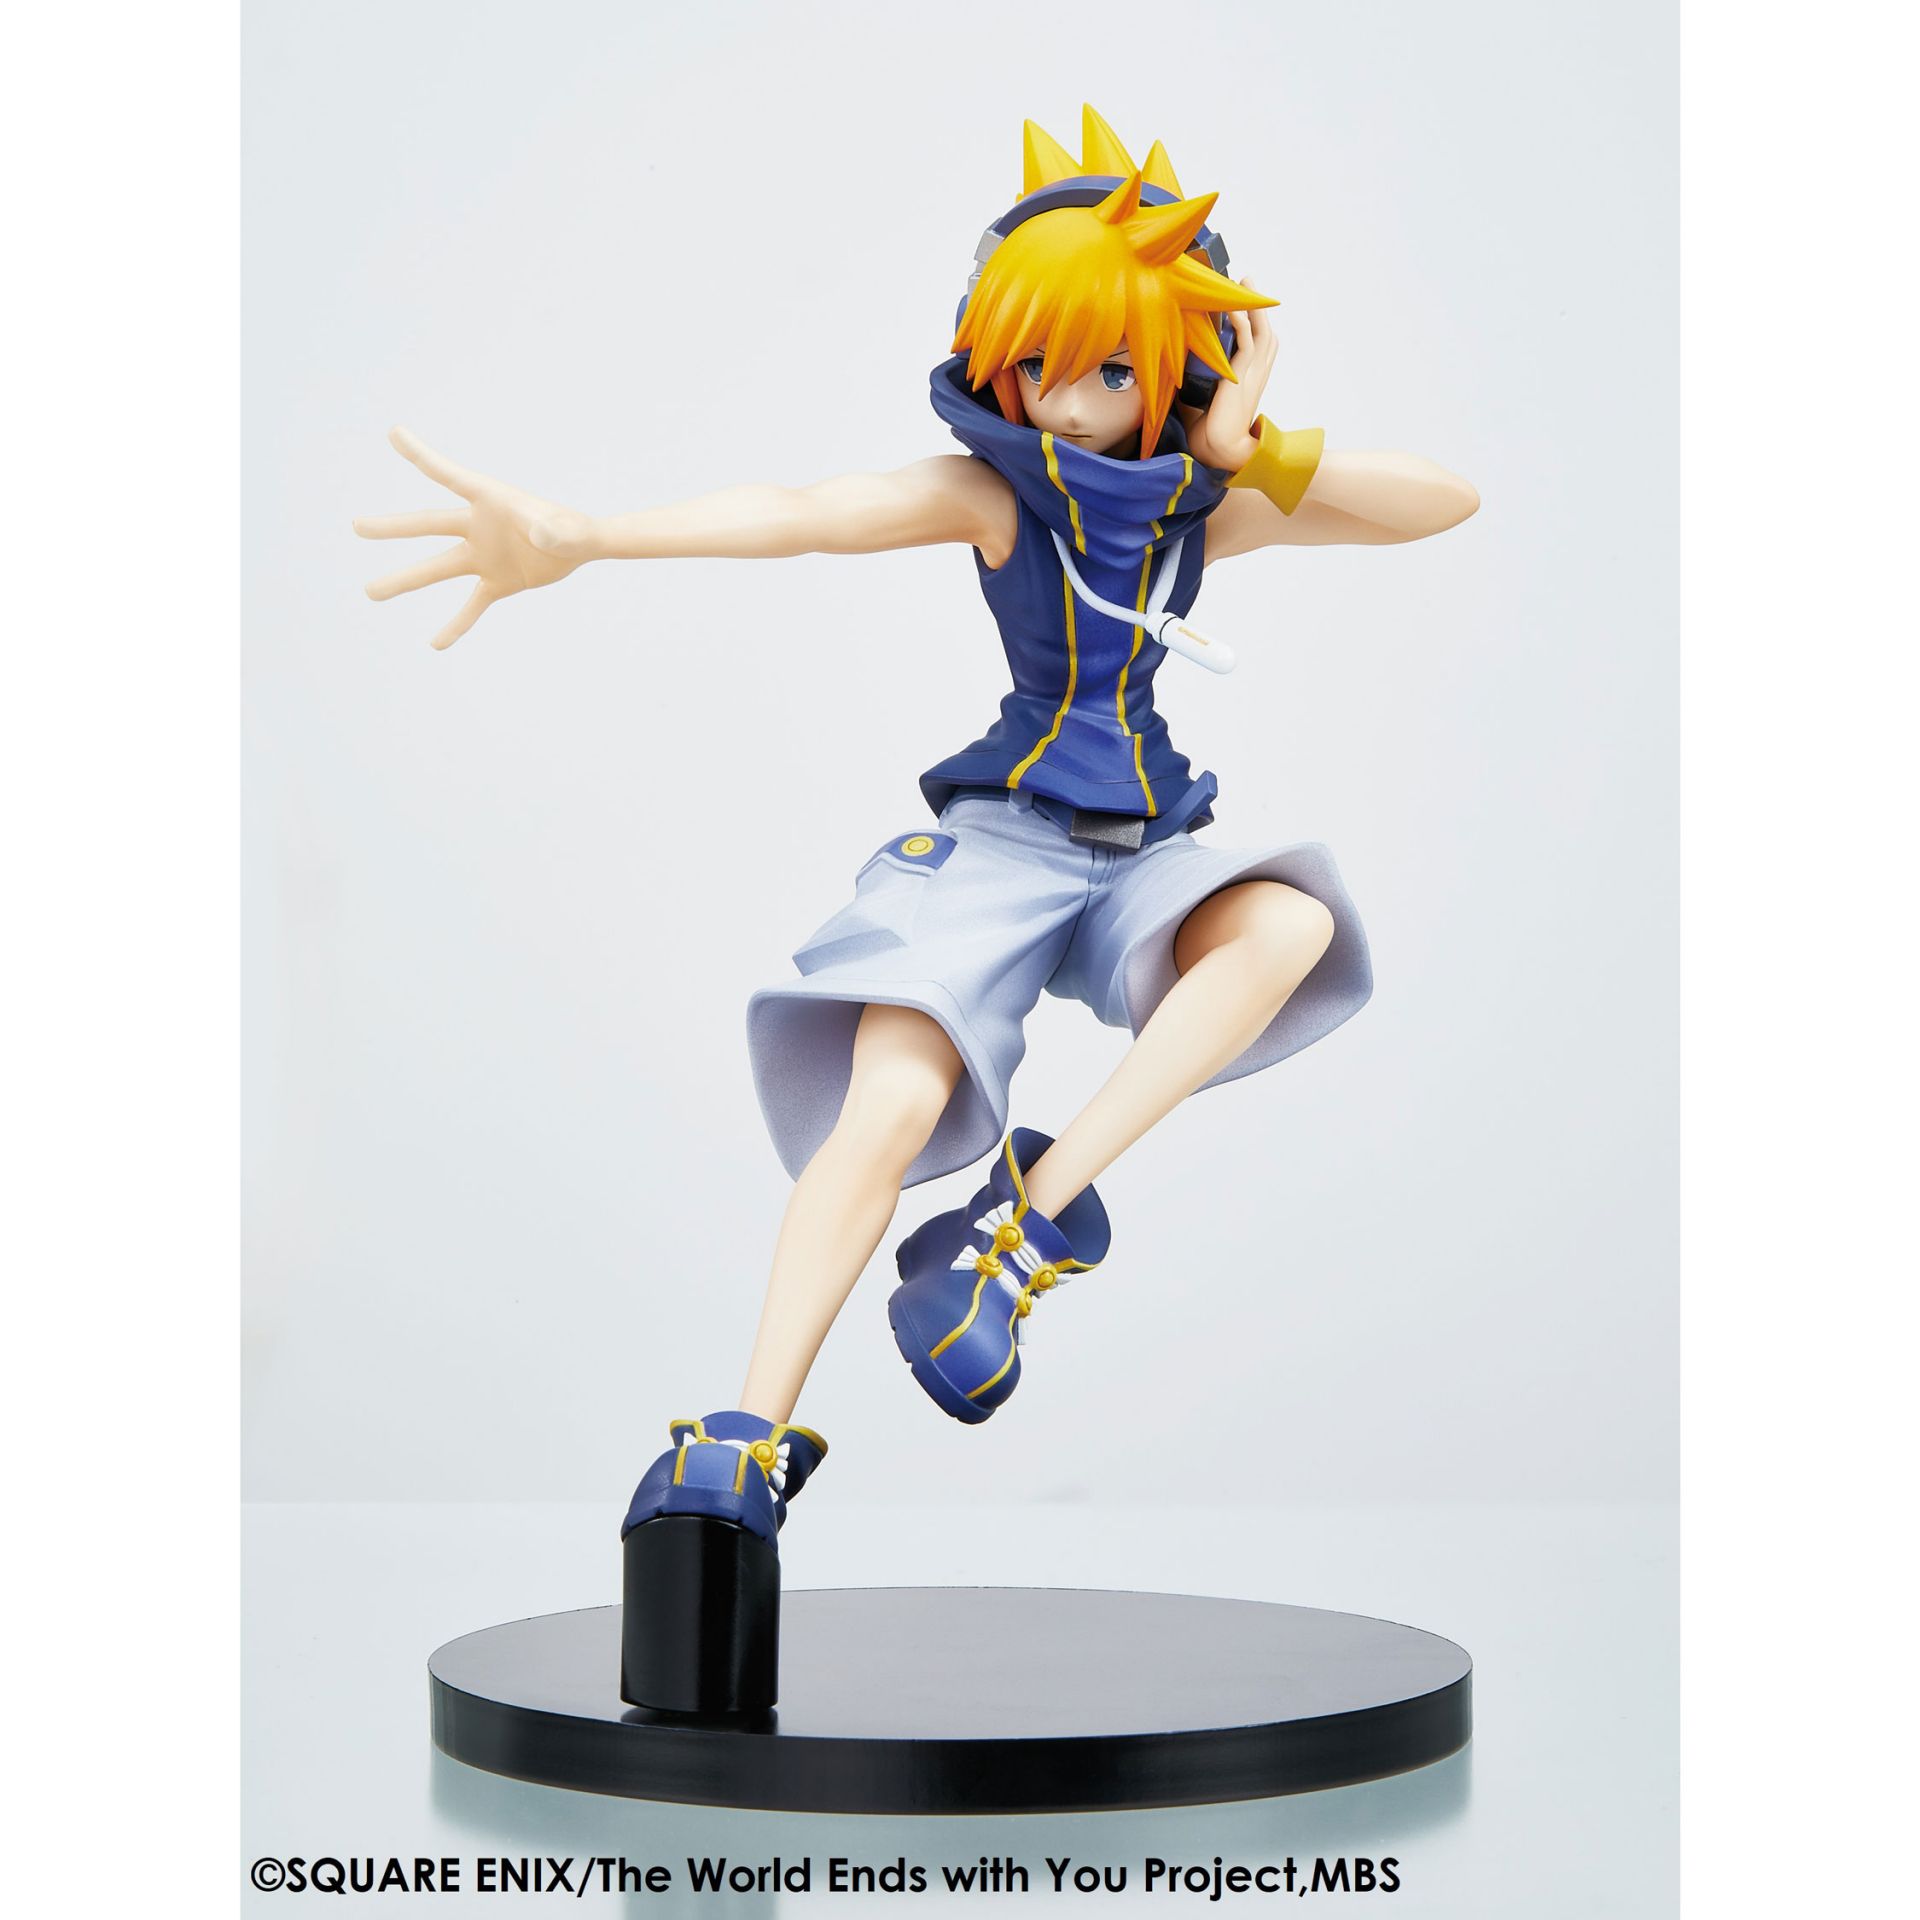 Square Enix Neku The World Ends with You Figure